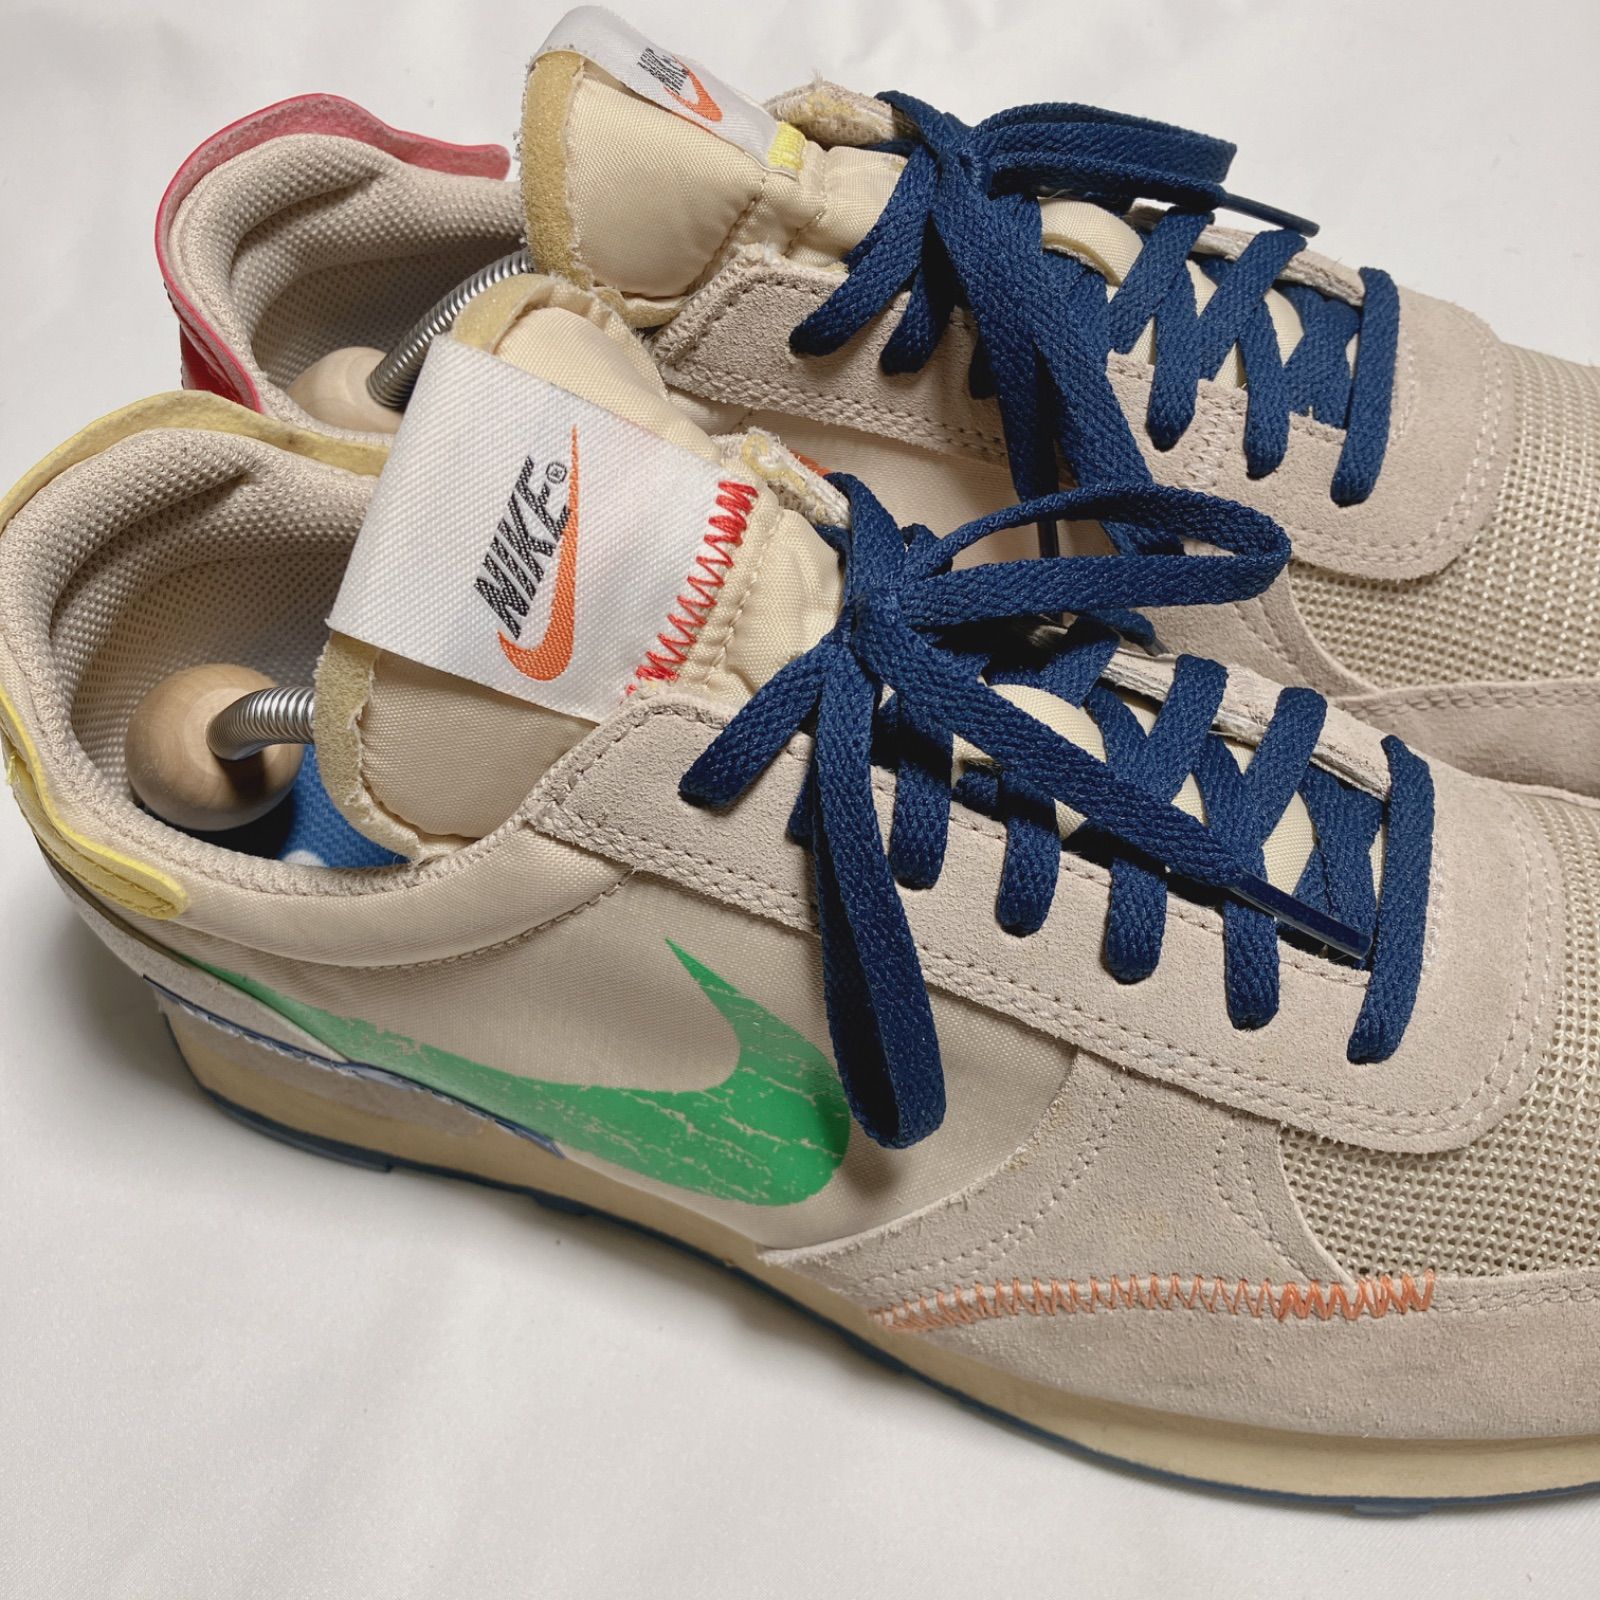 NIKE DBREAK-TYPE デイブレイク 28.5cm OATMEAL/GREEN SPARK-FOSSIL STONE